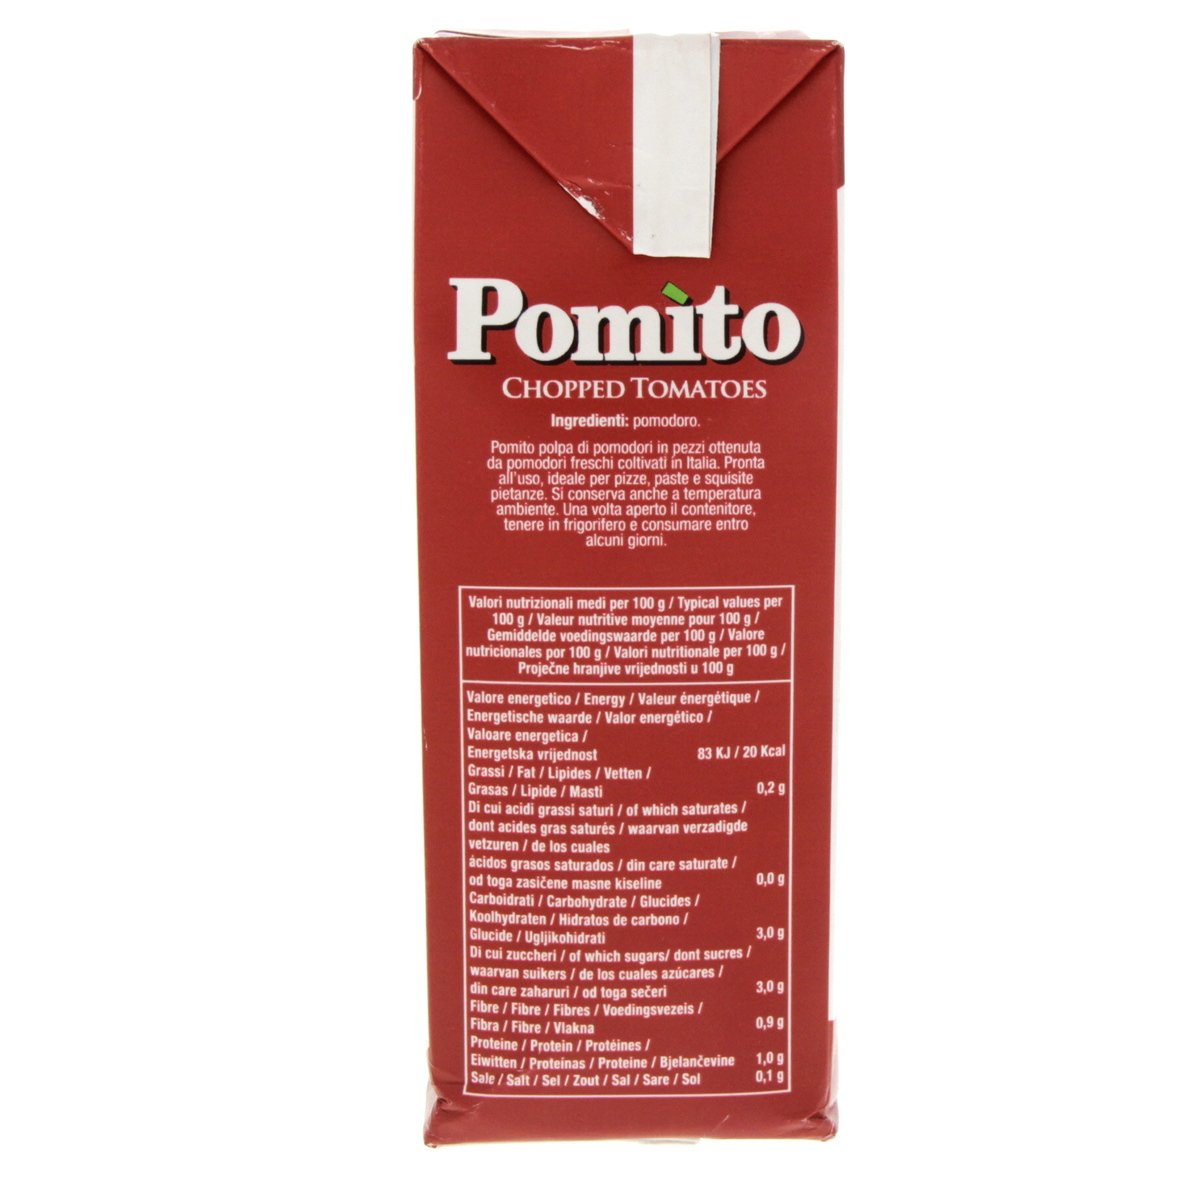 Pomito Chopped Tomatoes 1 kg